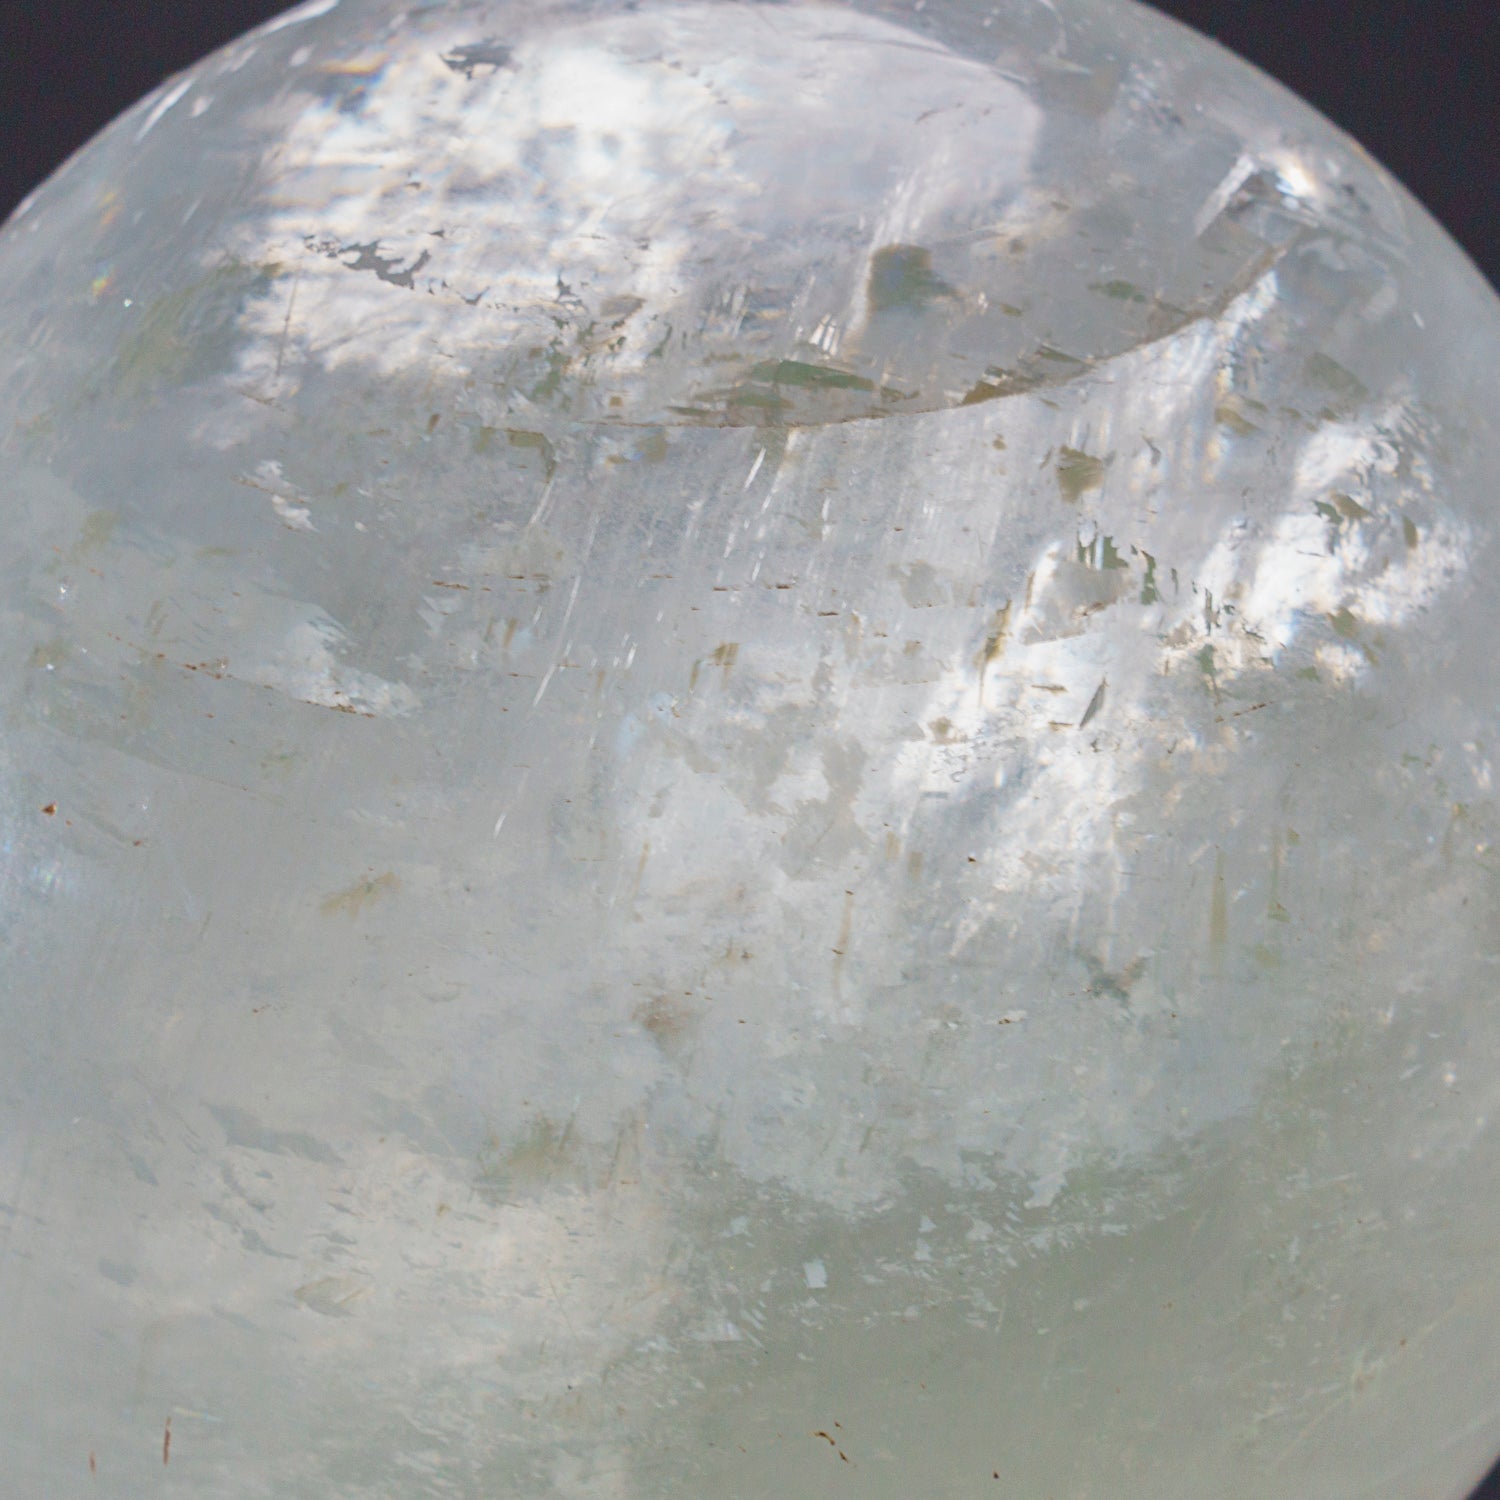 Genuine Polished Calcite Sphere From Brazil (3.5", 2 lbs)